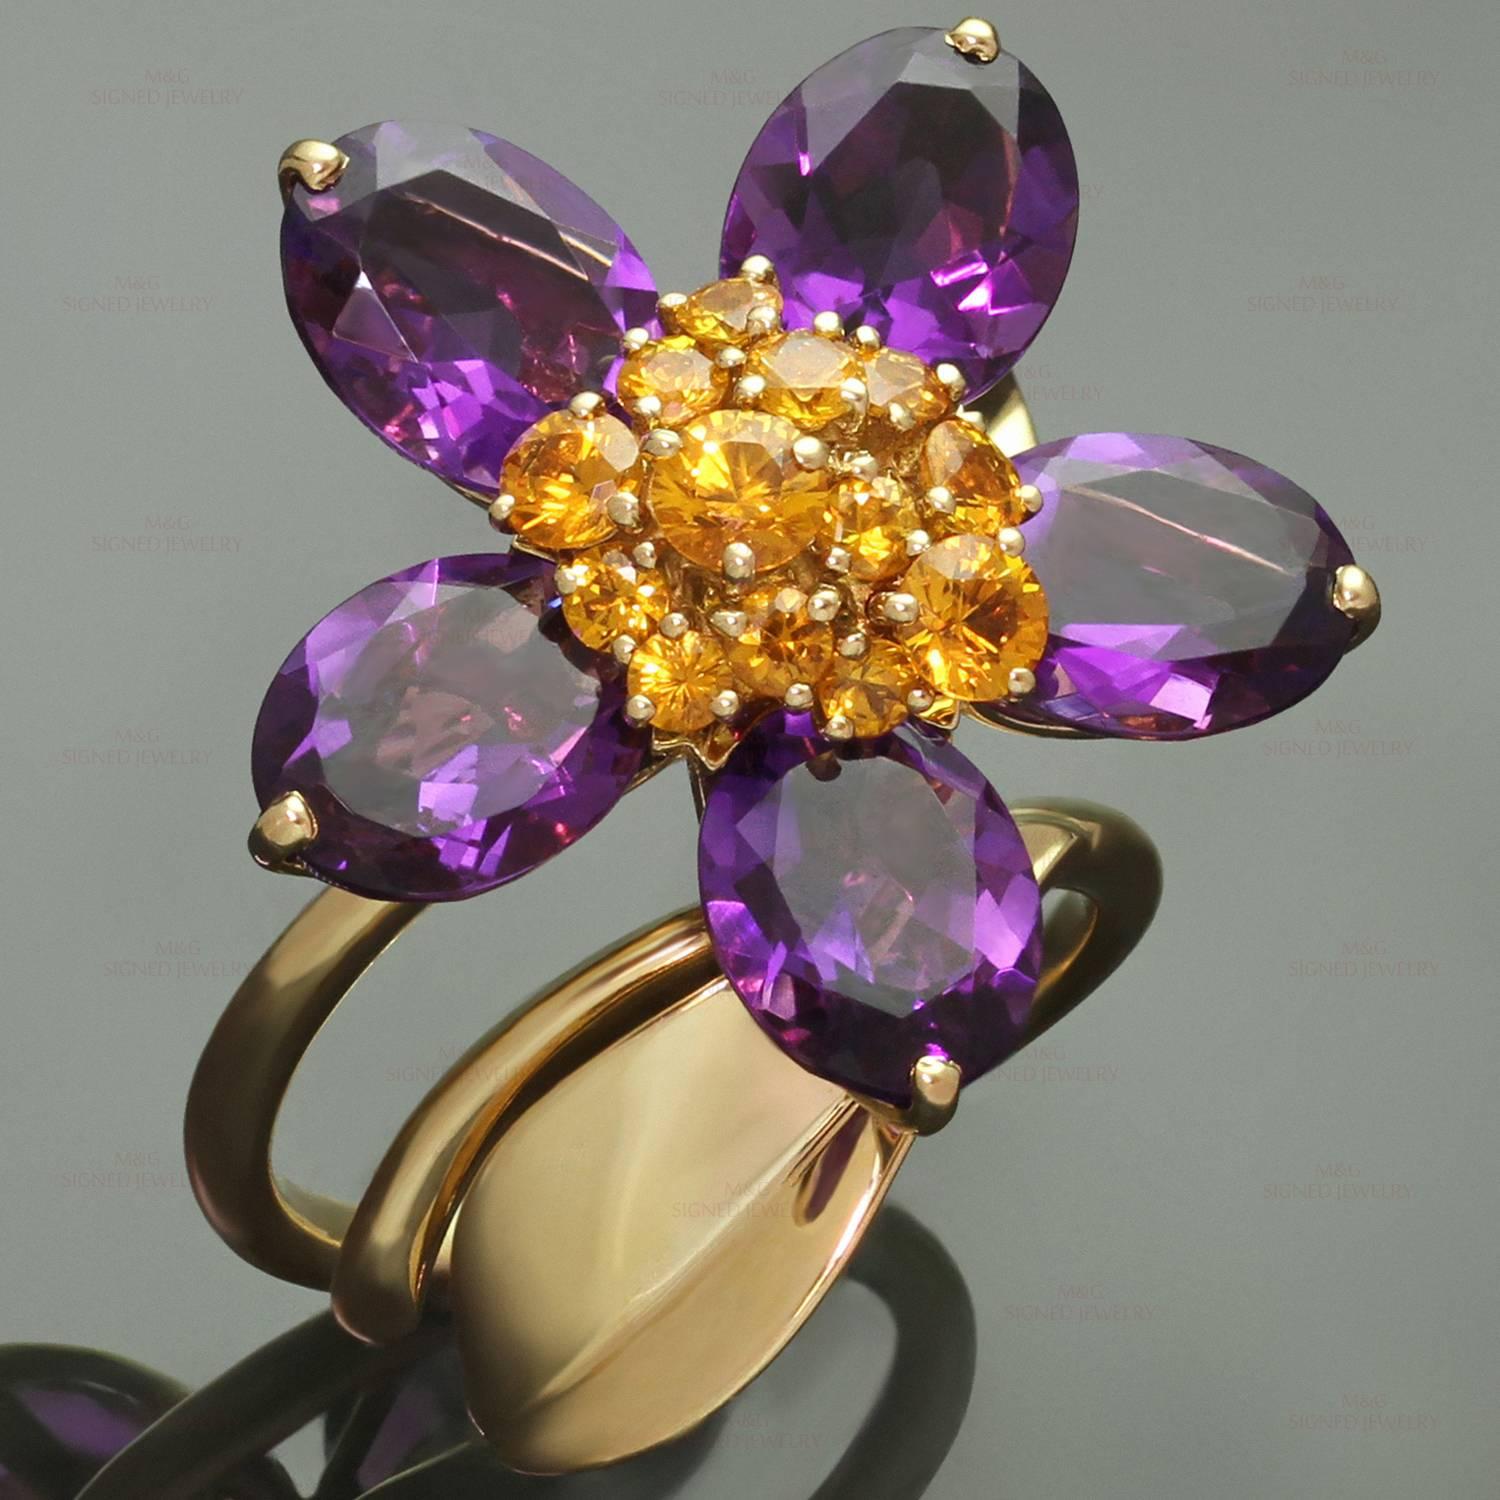 This stunning Van Cleef & Arpels ring from the vibrant Hawaii collection is made in 18k yellow gold and features an open band accented with a leaf and a rotatable flower composed of 5 faceted amethyst petals and a cluster of faceted orange